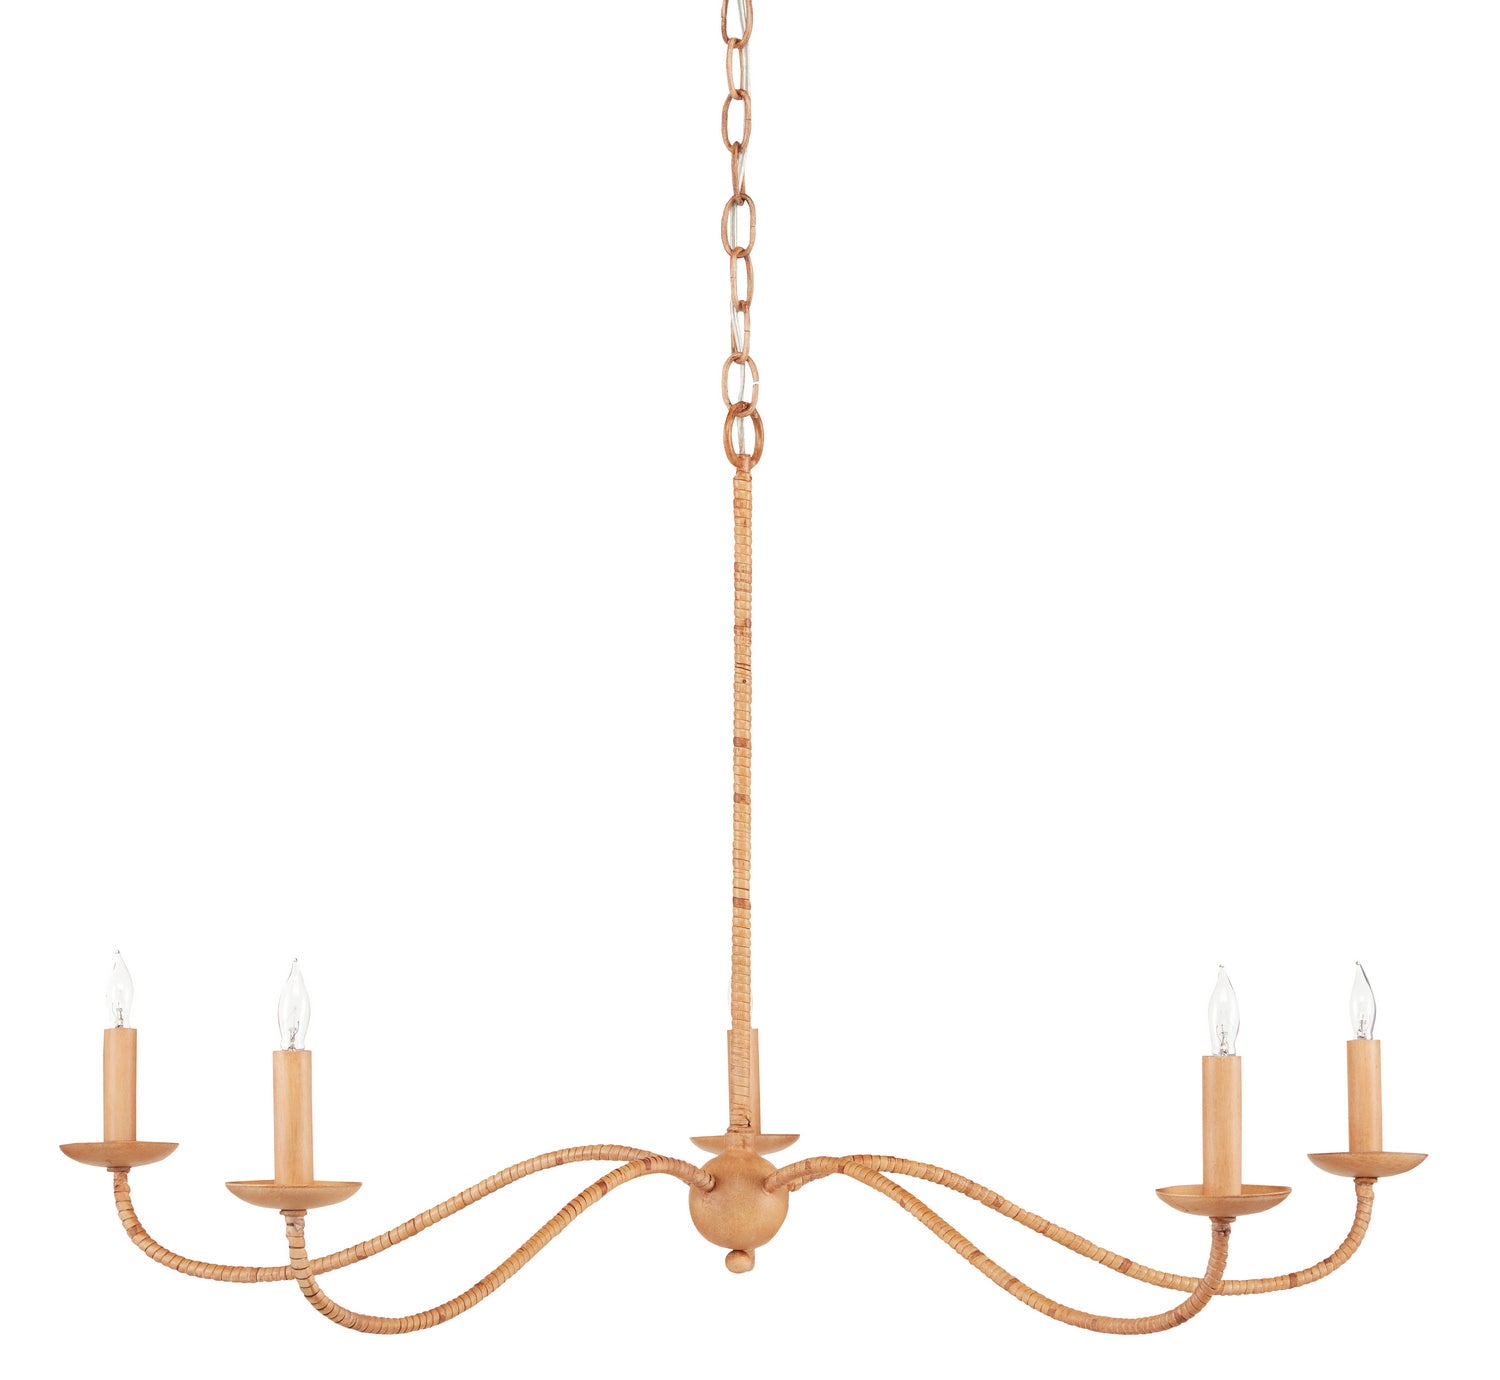 Five Light Chandelier from the Saxon Rattan collection in Saddle Tan/Natural Rattan finish